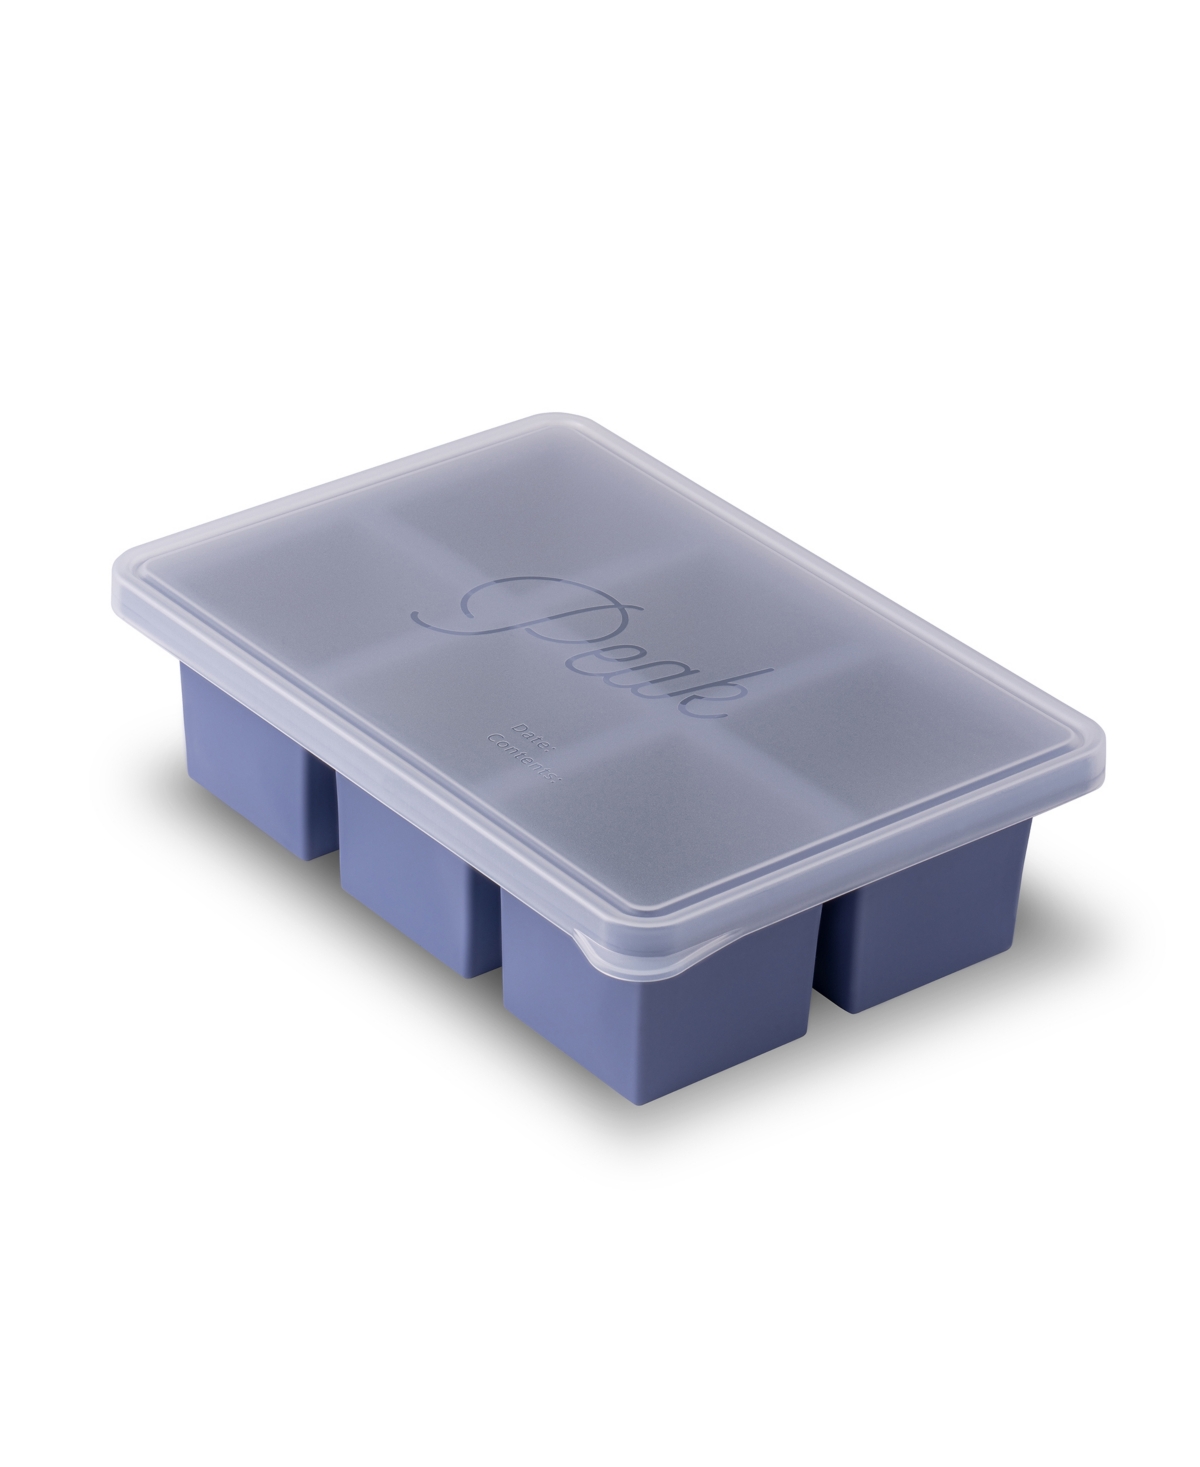 W&p Design W&p Set Of 2 Can Be Used Again Cup Cube, 6 Cup Tray In Blue